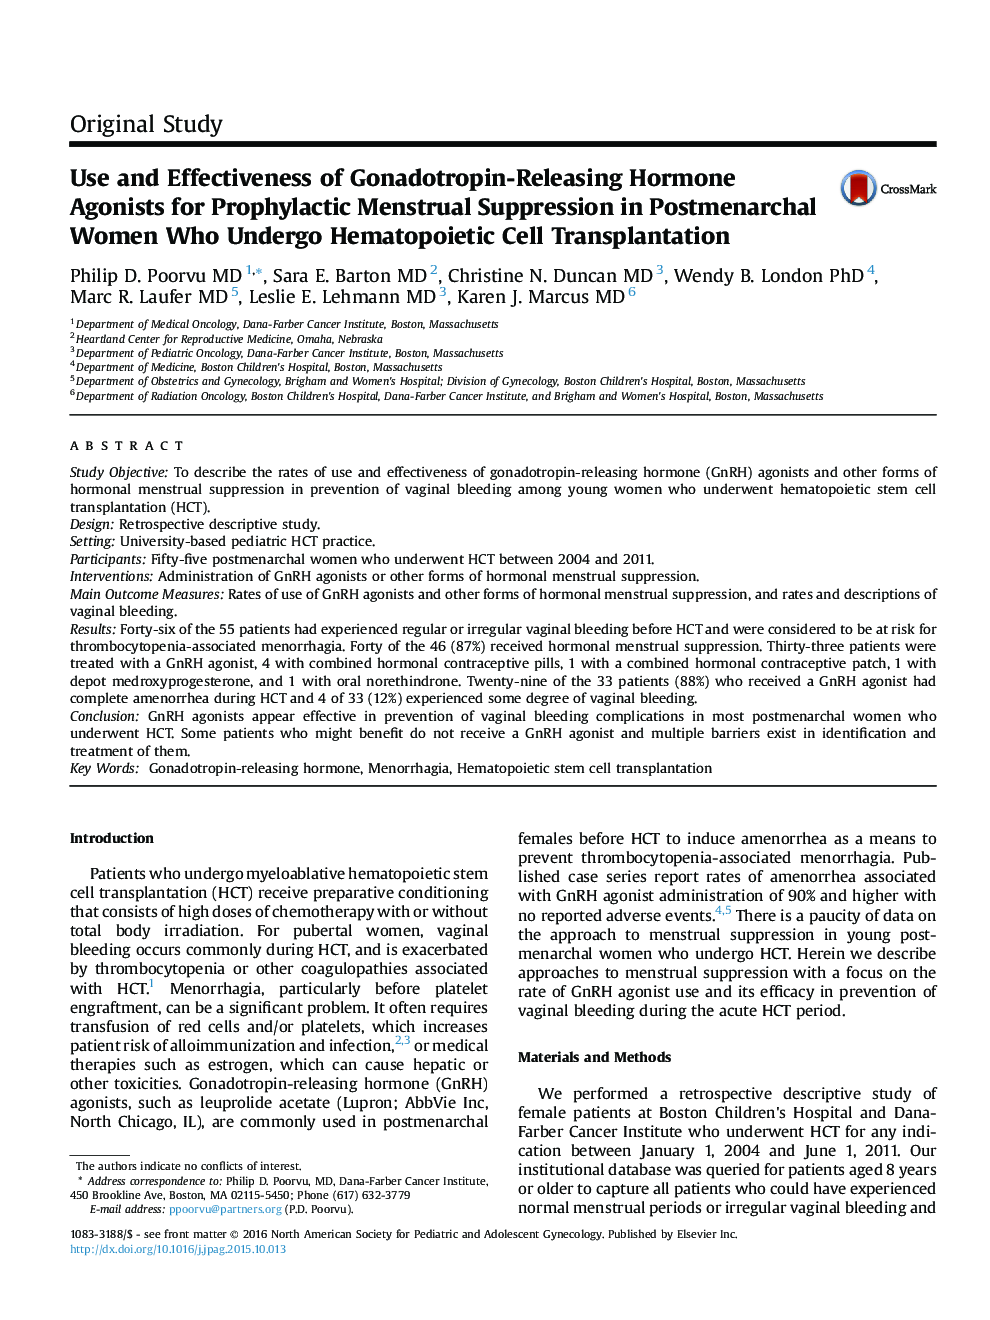 Use and Effectiveness of Gonadotropin-Releasing Hormone Agonists for Prophylactic Menstrual Suppression in Postmenarchal Women Who Undergo Hematopoietic Cell Transplantation 